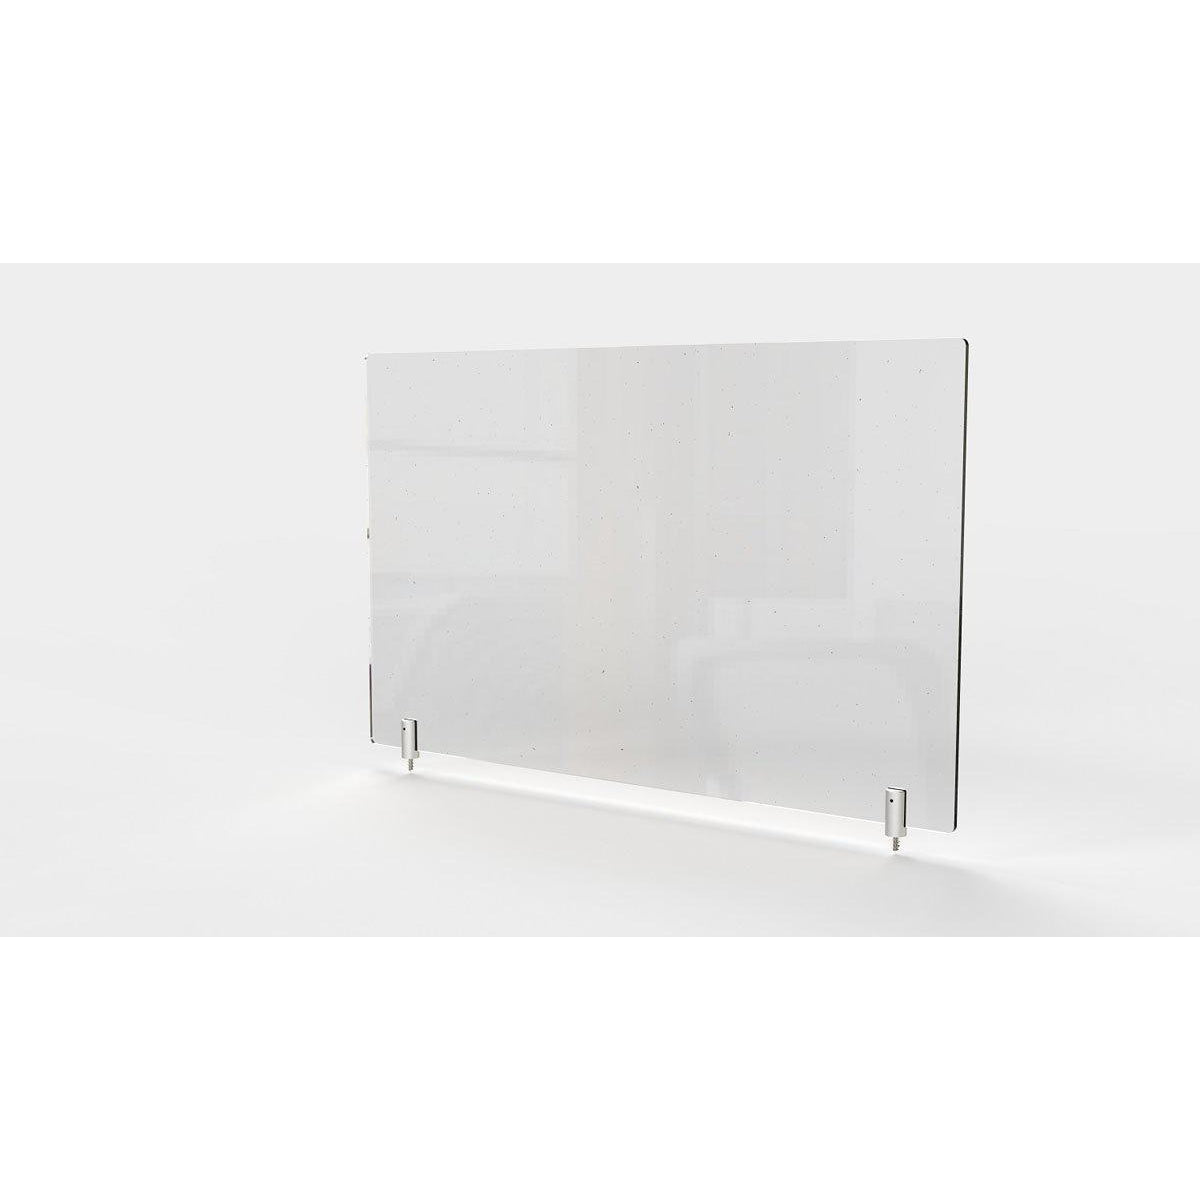 Clear Thermoplastic Partition & Cubicle Extender with Permanent Screw Attachment, 24"H x 42"W